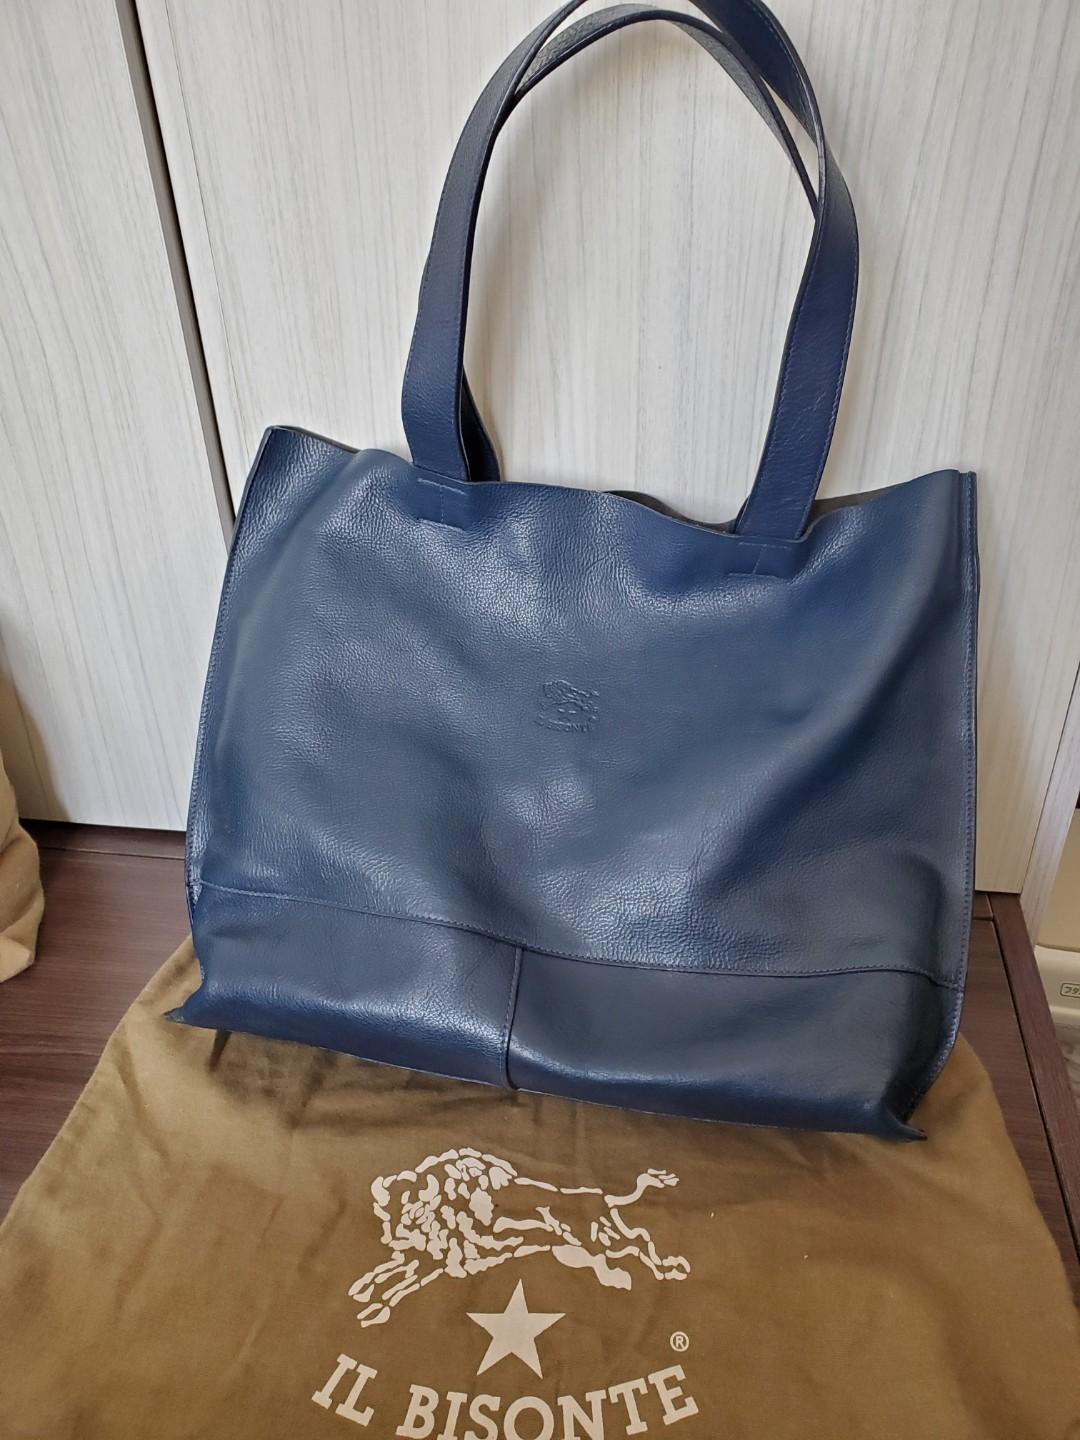 🈹️🈹️Il bisonte 深藍色真皮tote bag (Made in Italy), 名牌, 手袋